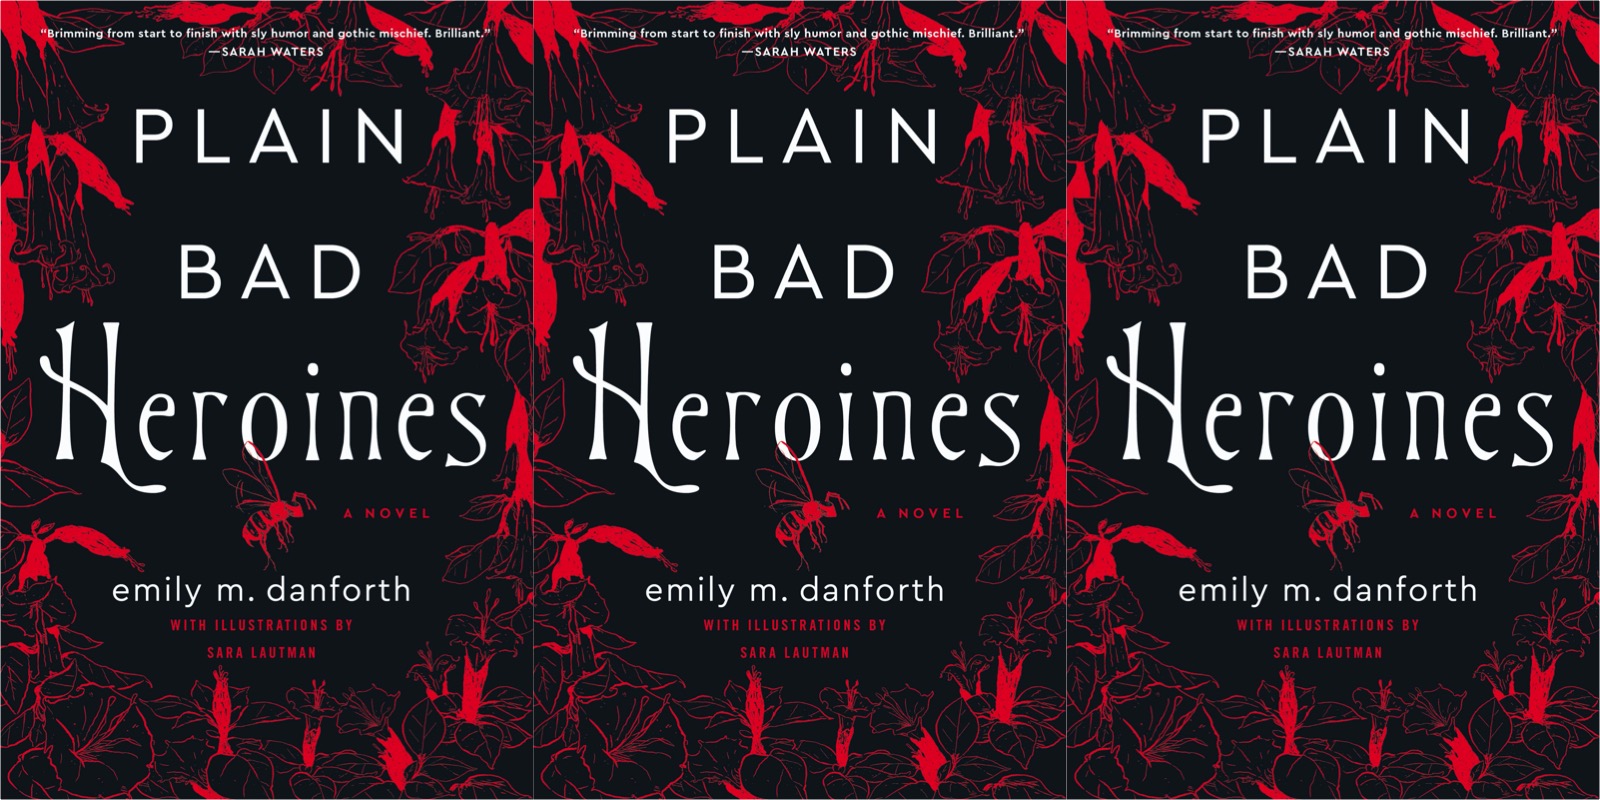 A repeated image three times of the cover of emily m danforth's Plain Bad Heroines